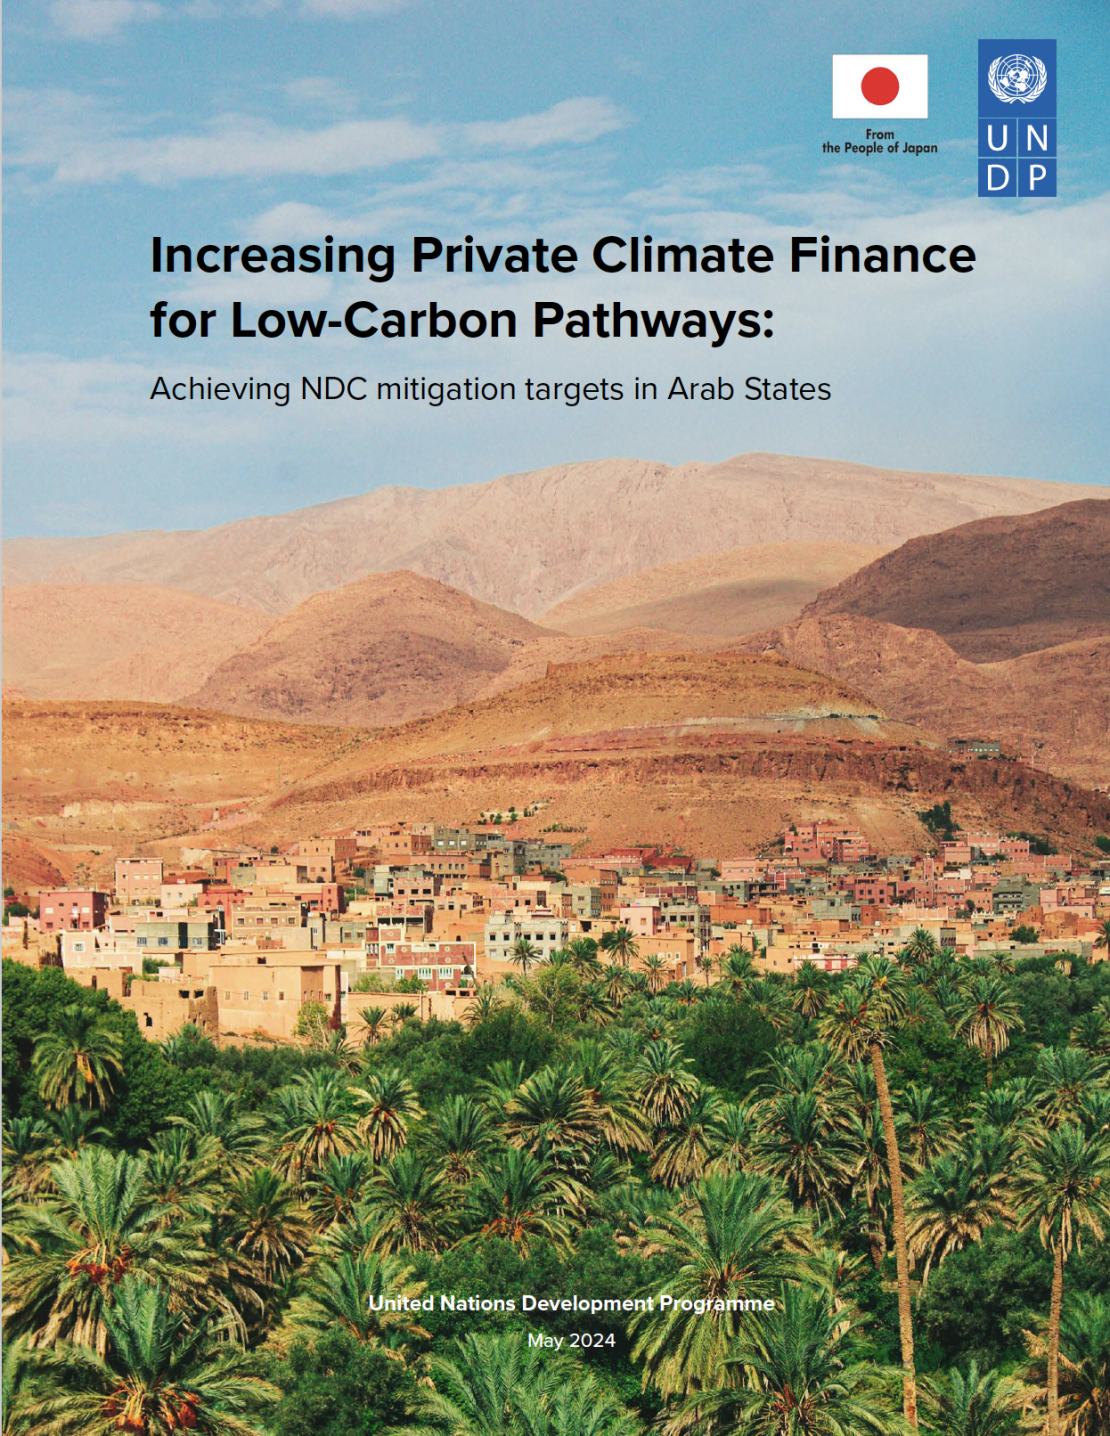 Increasing private climate finance for low-carbon pathways: Achieving NDC mitigation targets in Arab States